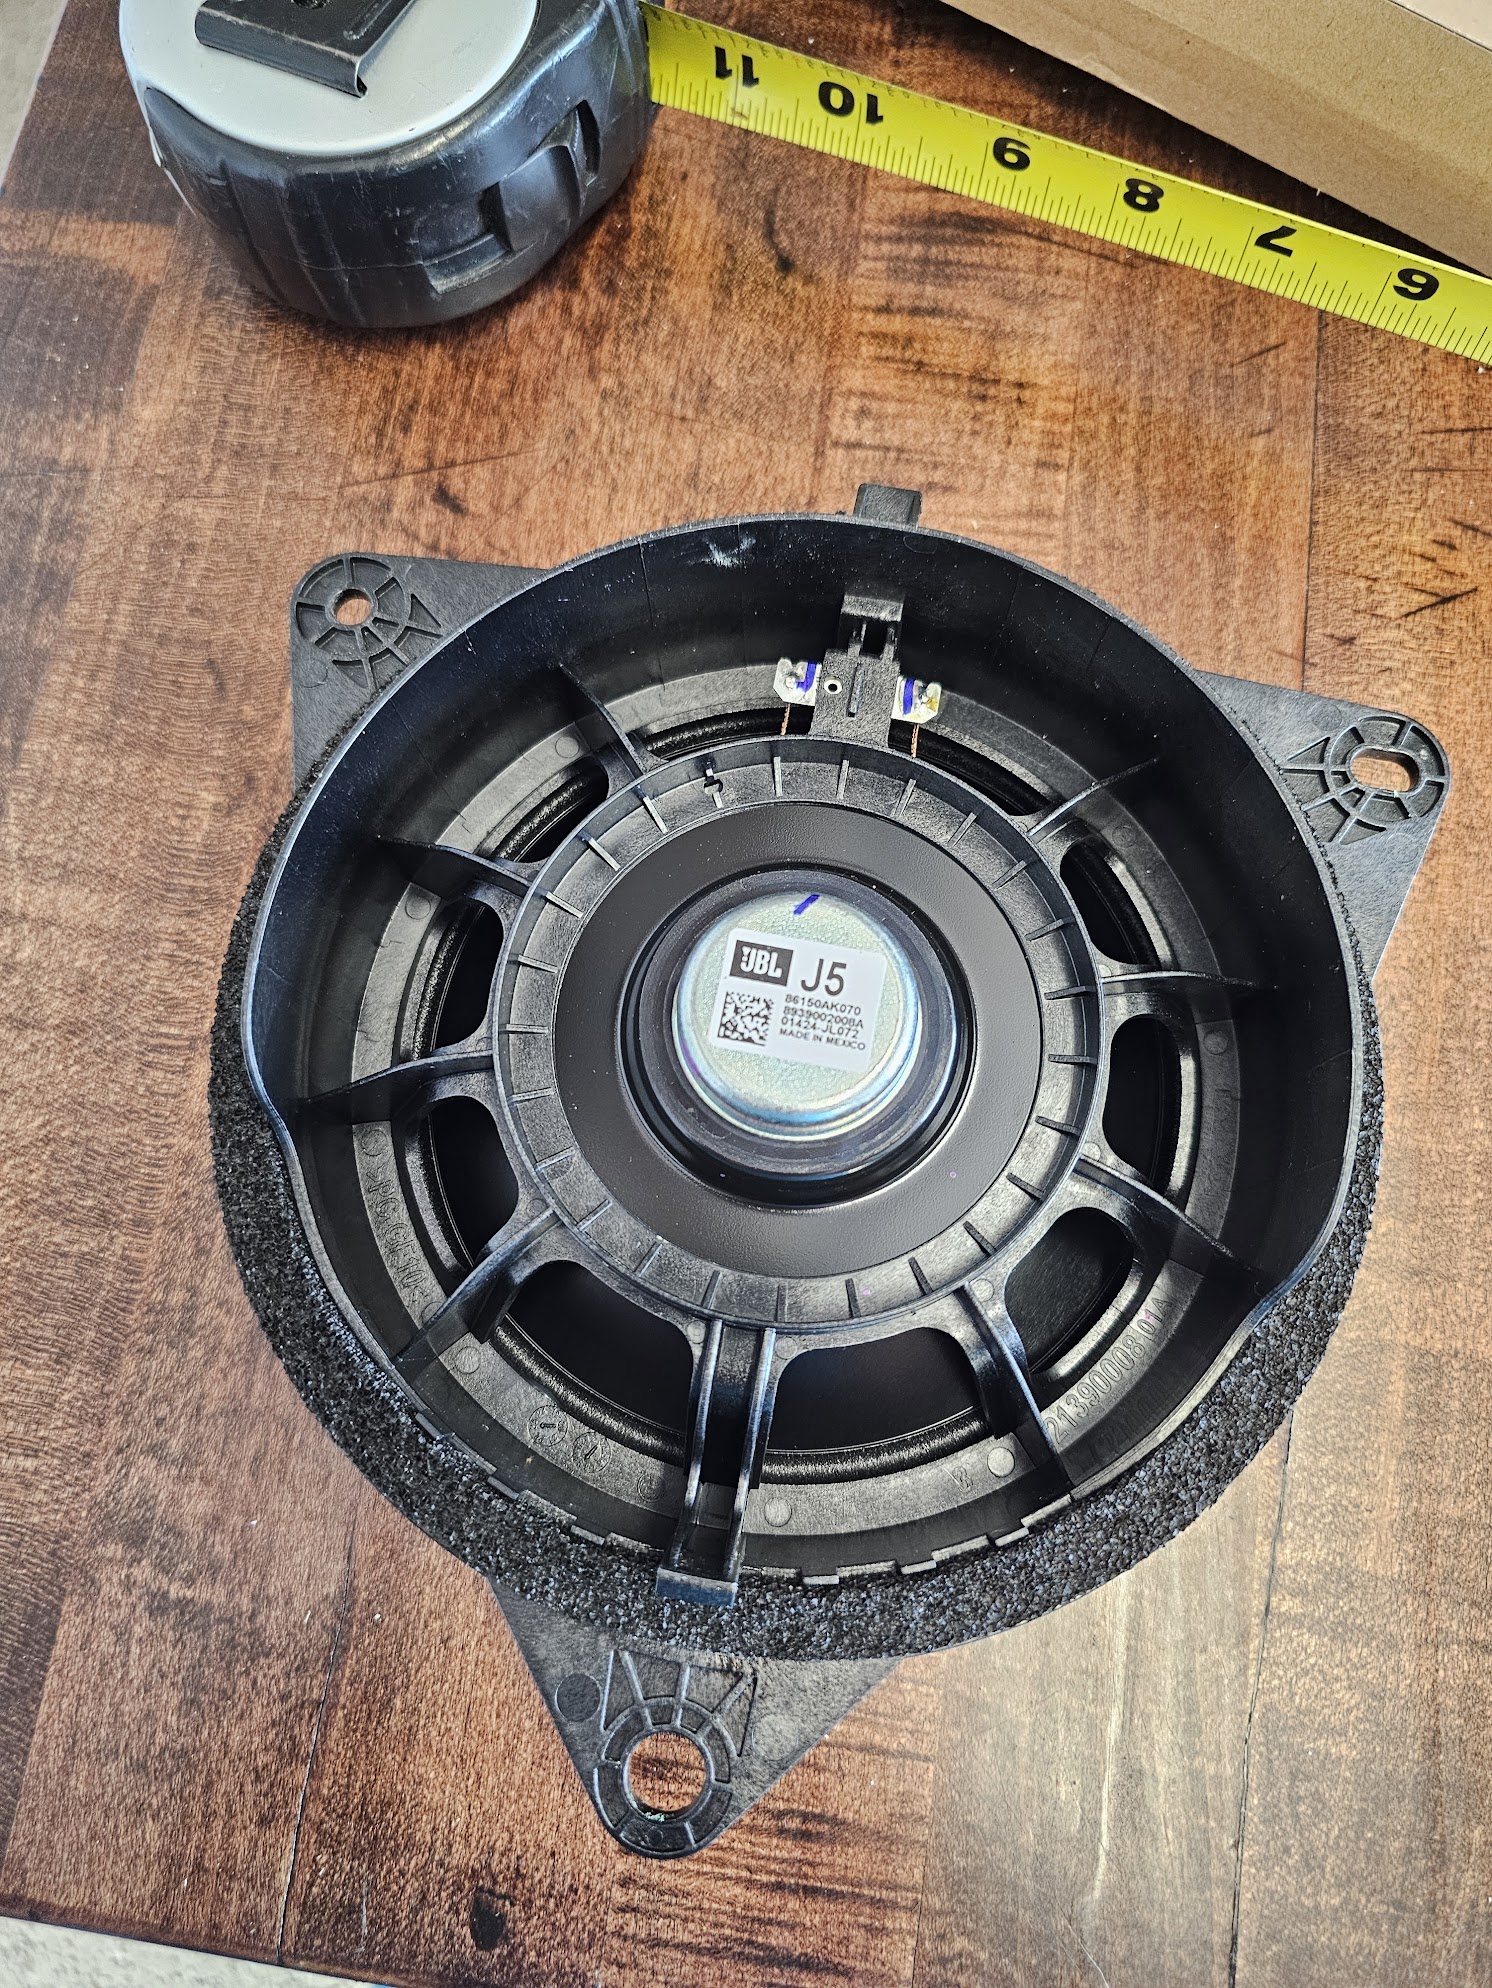 2024 Tacoma Dimensions of factory JBL 8" Subwoofer? [updated with measurements of 6" speakers and 10" subwoofer] 20240421_104600